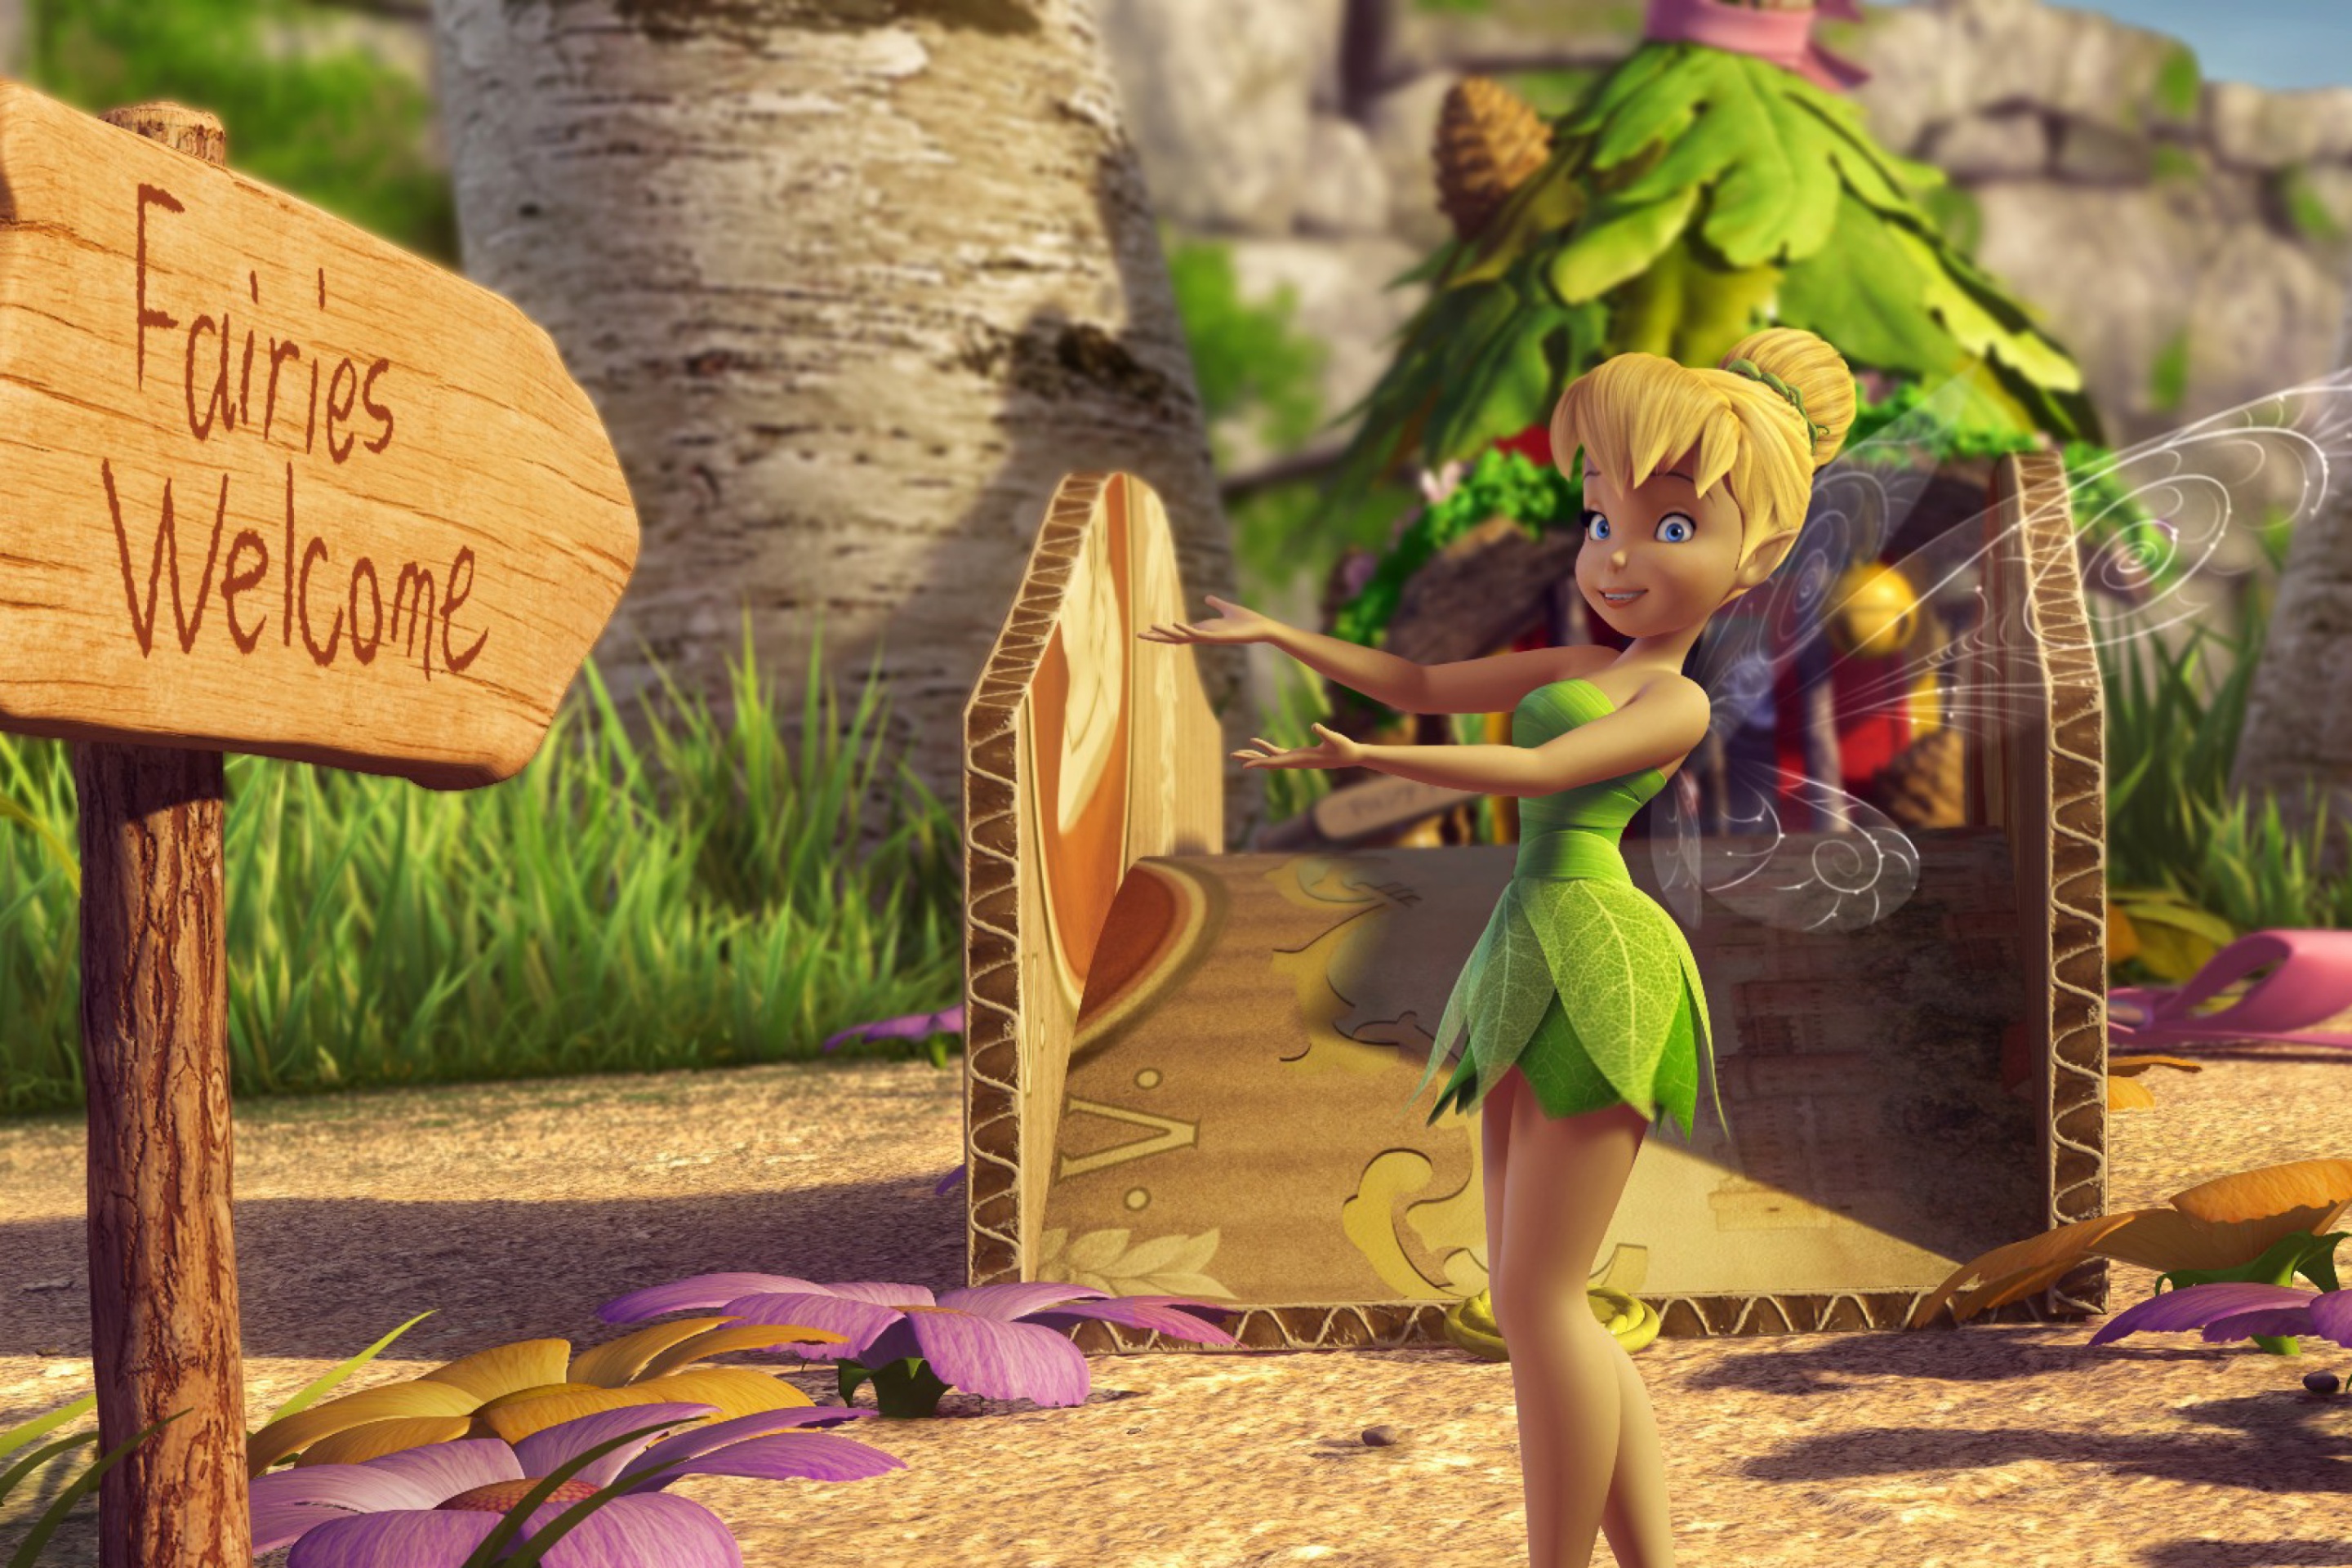 Das Tinker Bell And The Great Fairy Rescue 2 Wallpaper 2880x1920